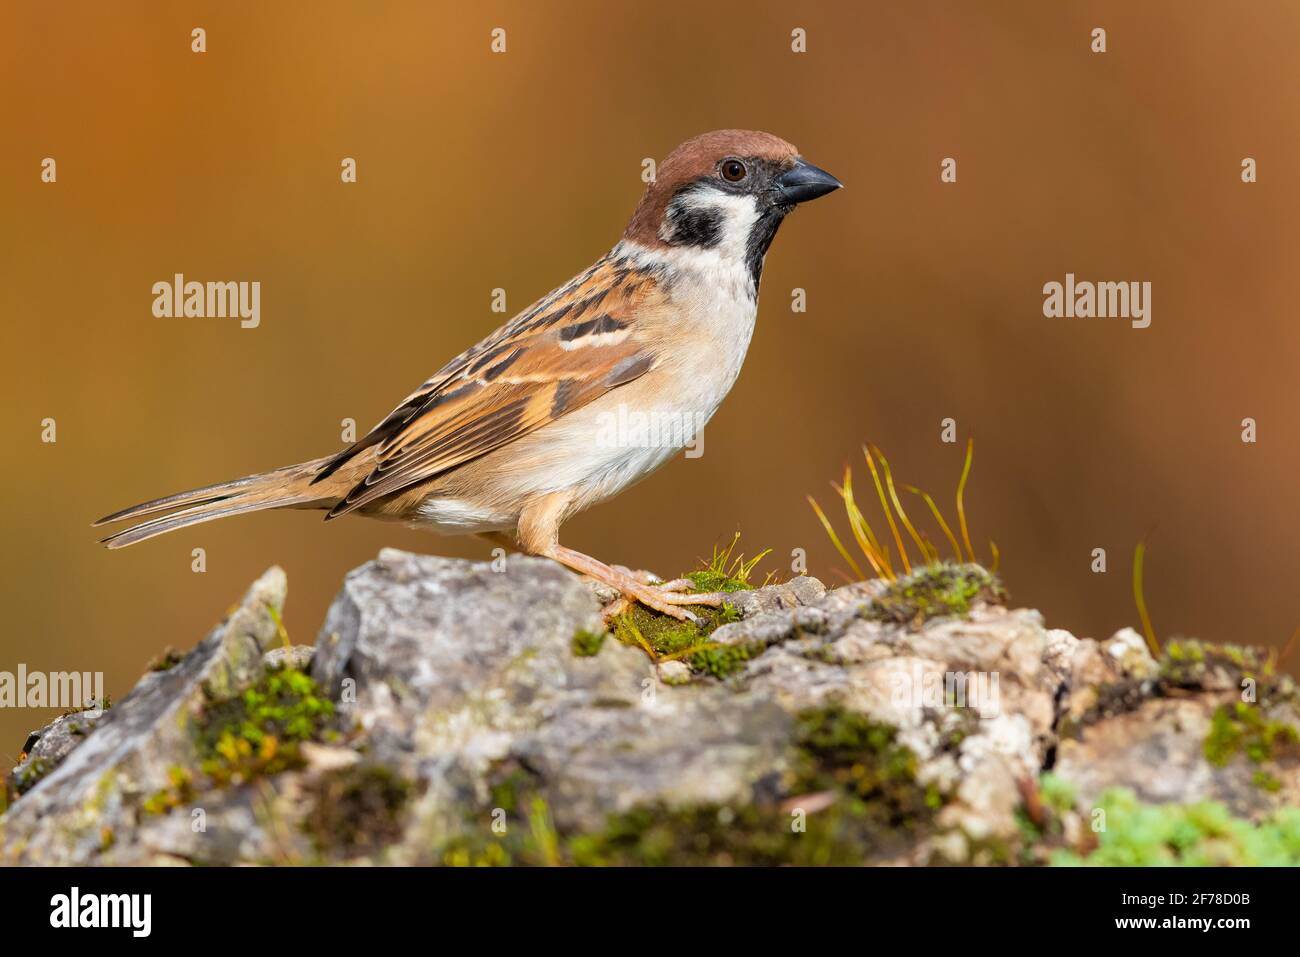 Eurasian Tree Sparrow (Passer montanus), side view of an adult standing on a rock, Campania, Italy Stock Photo